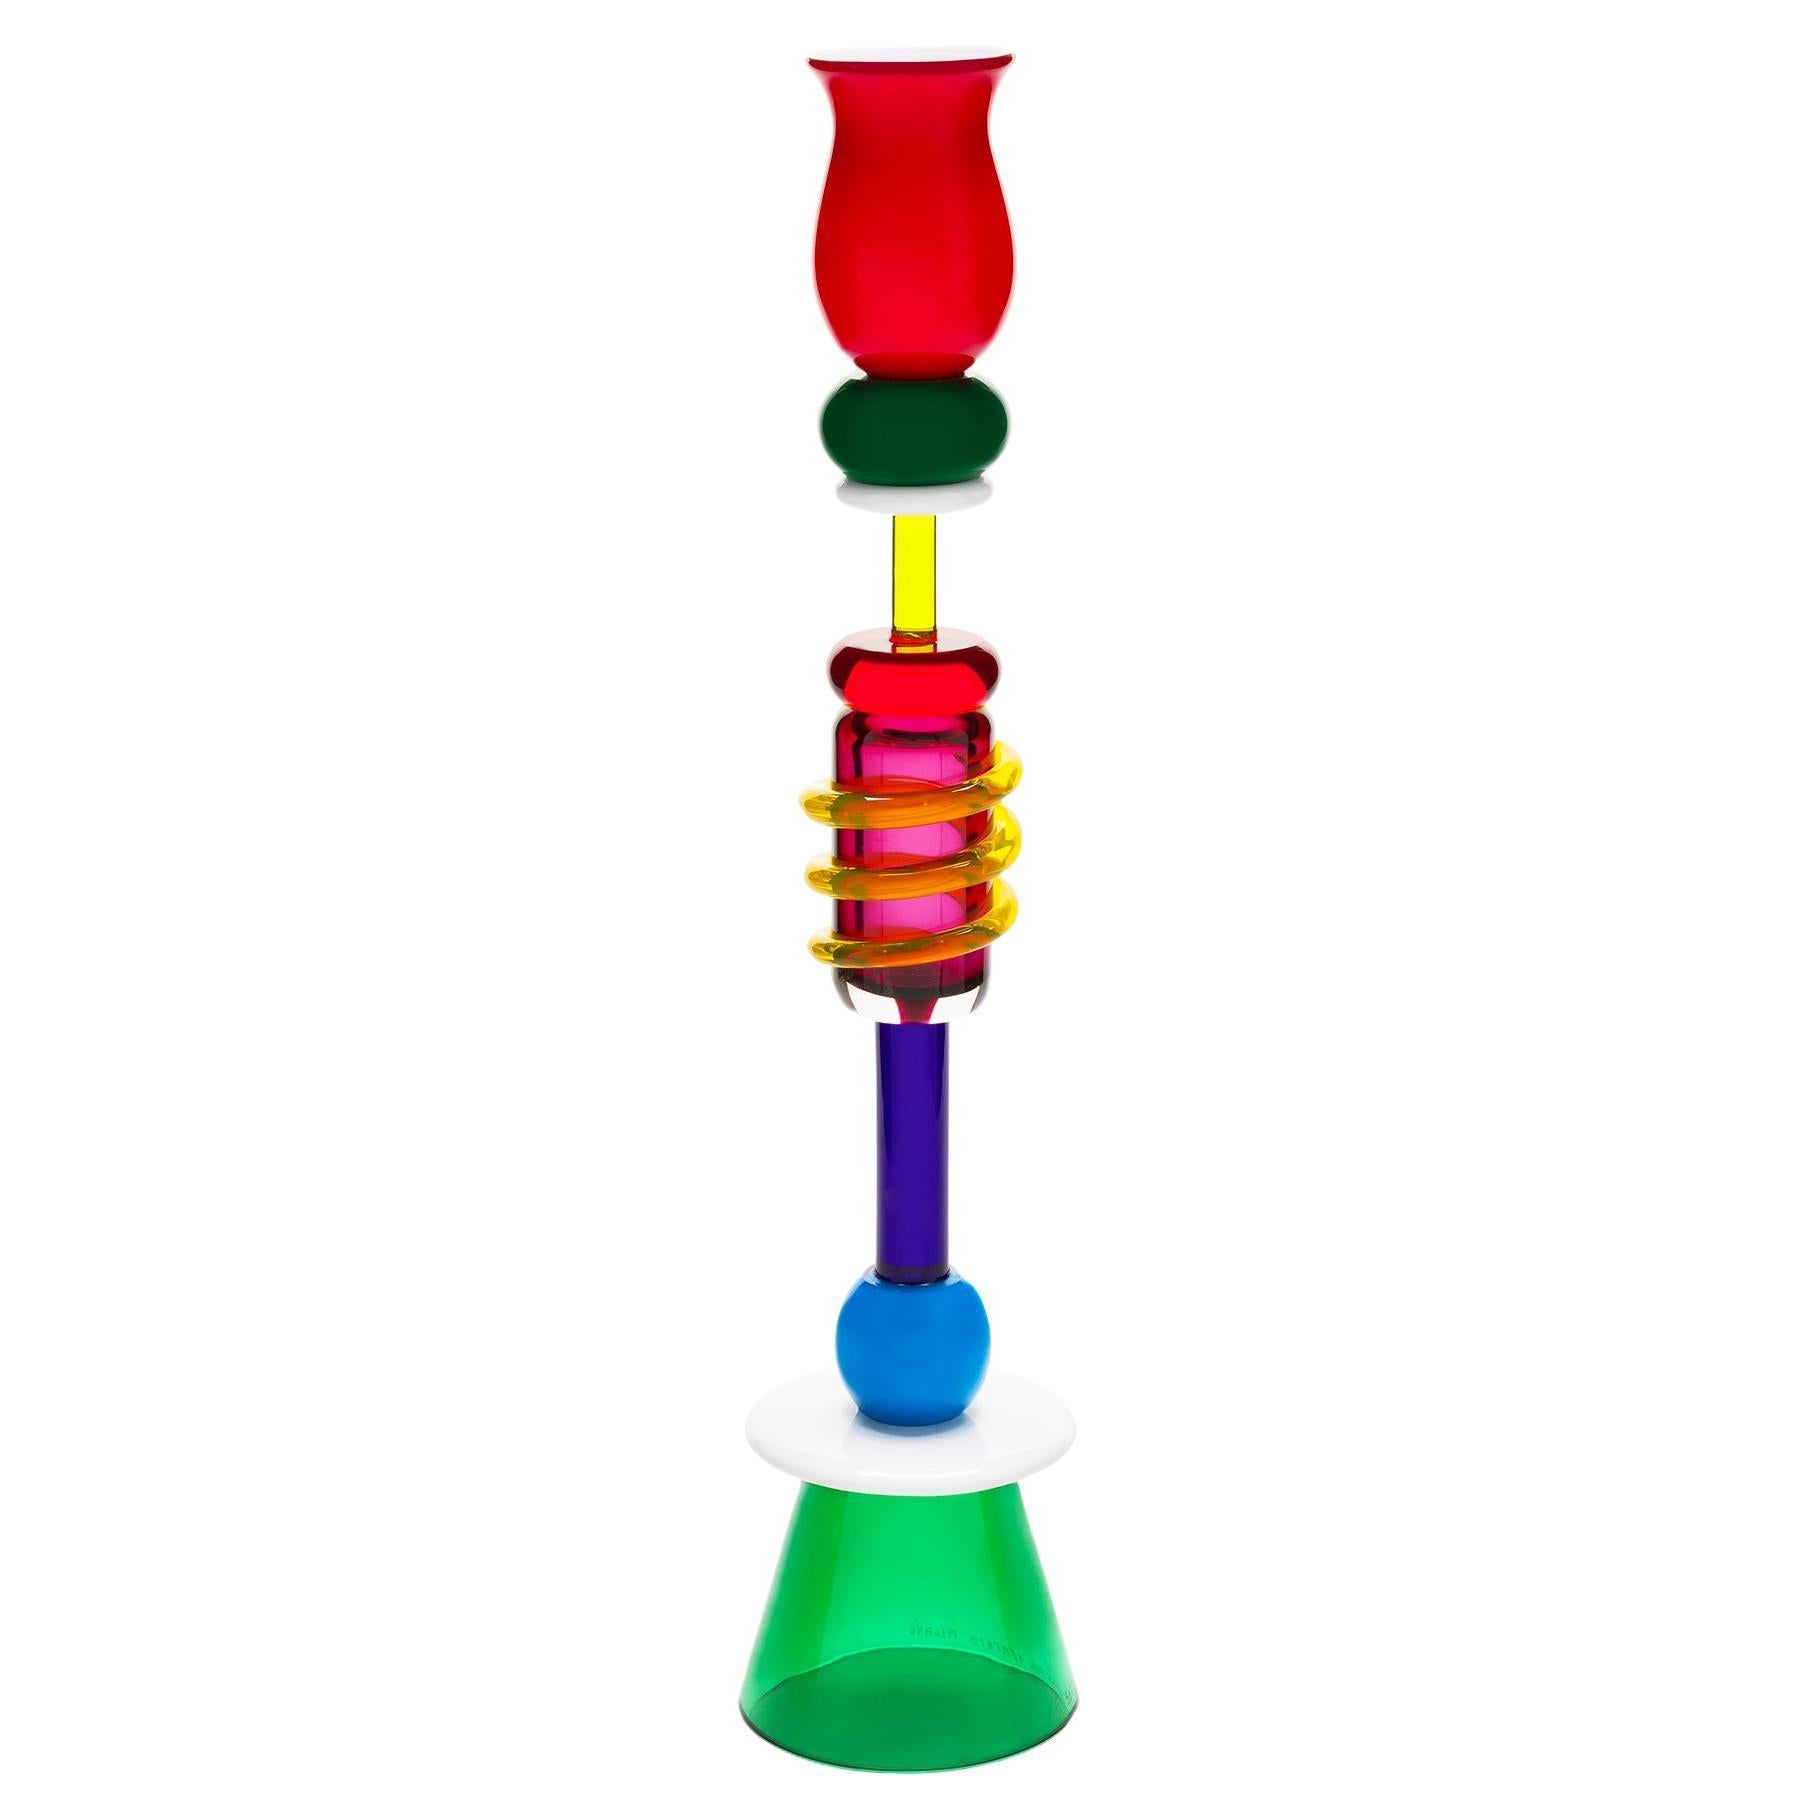 32 Ananke Glass Vase, by Ettore Sottsass from Memphis Milano